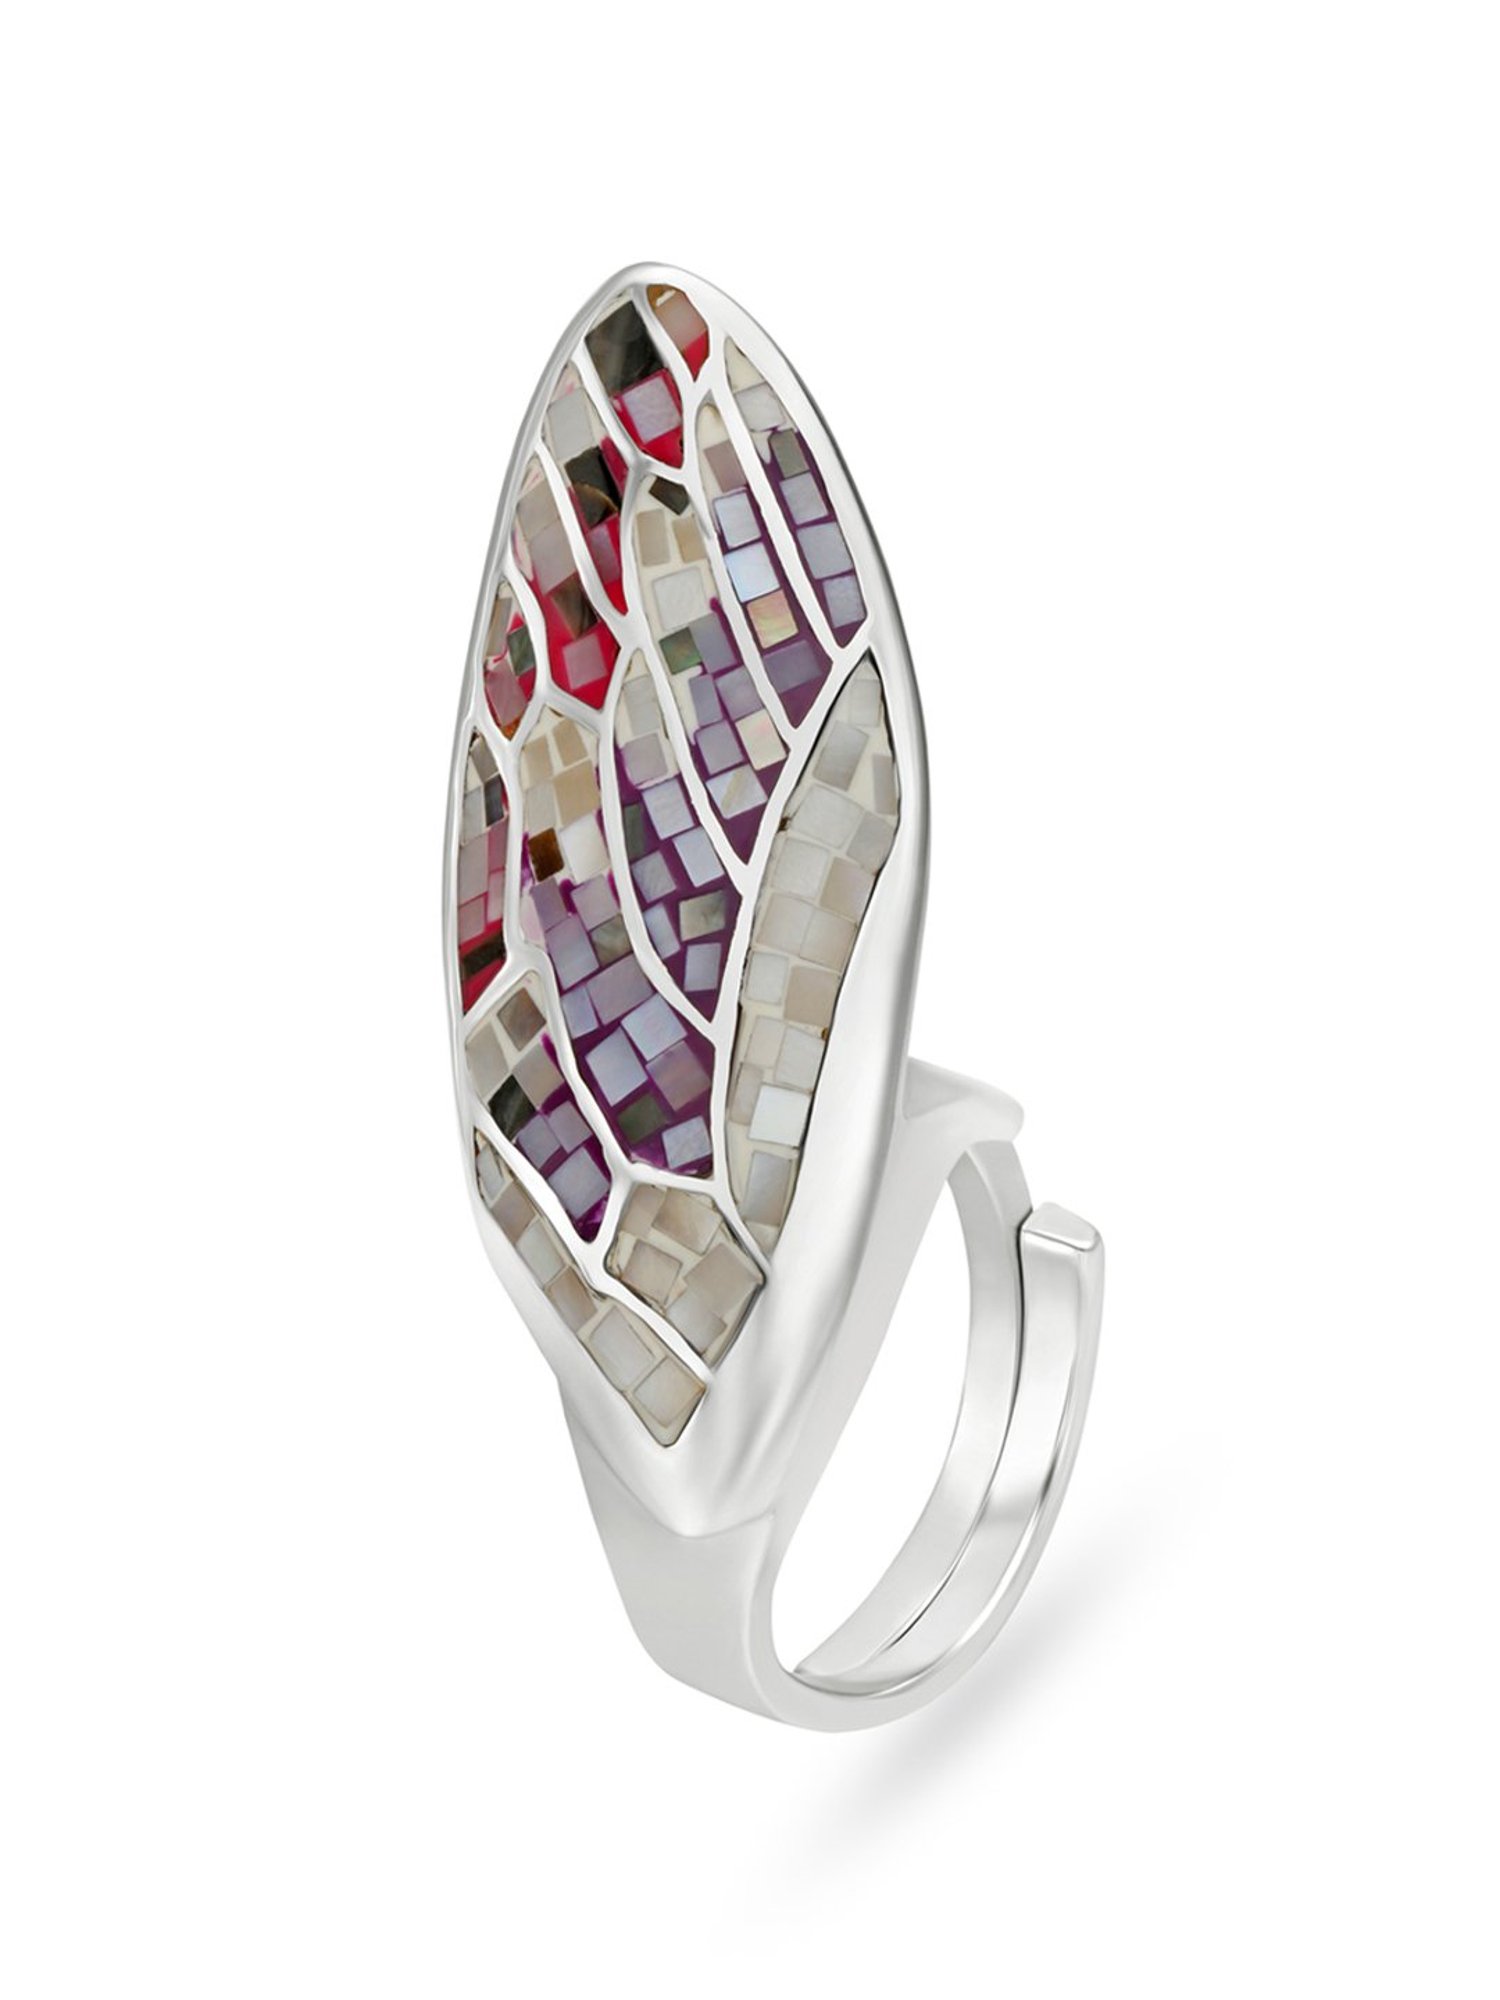 925 Silver Enchanting Wavy Ring with Garnets and Sapphires